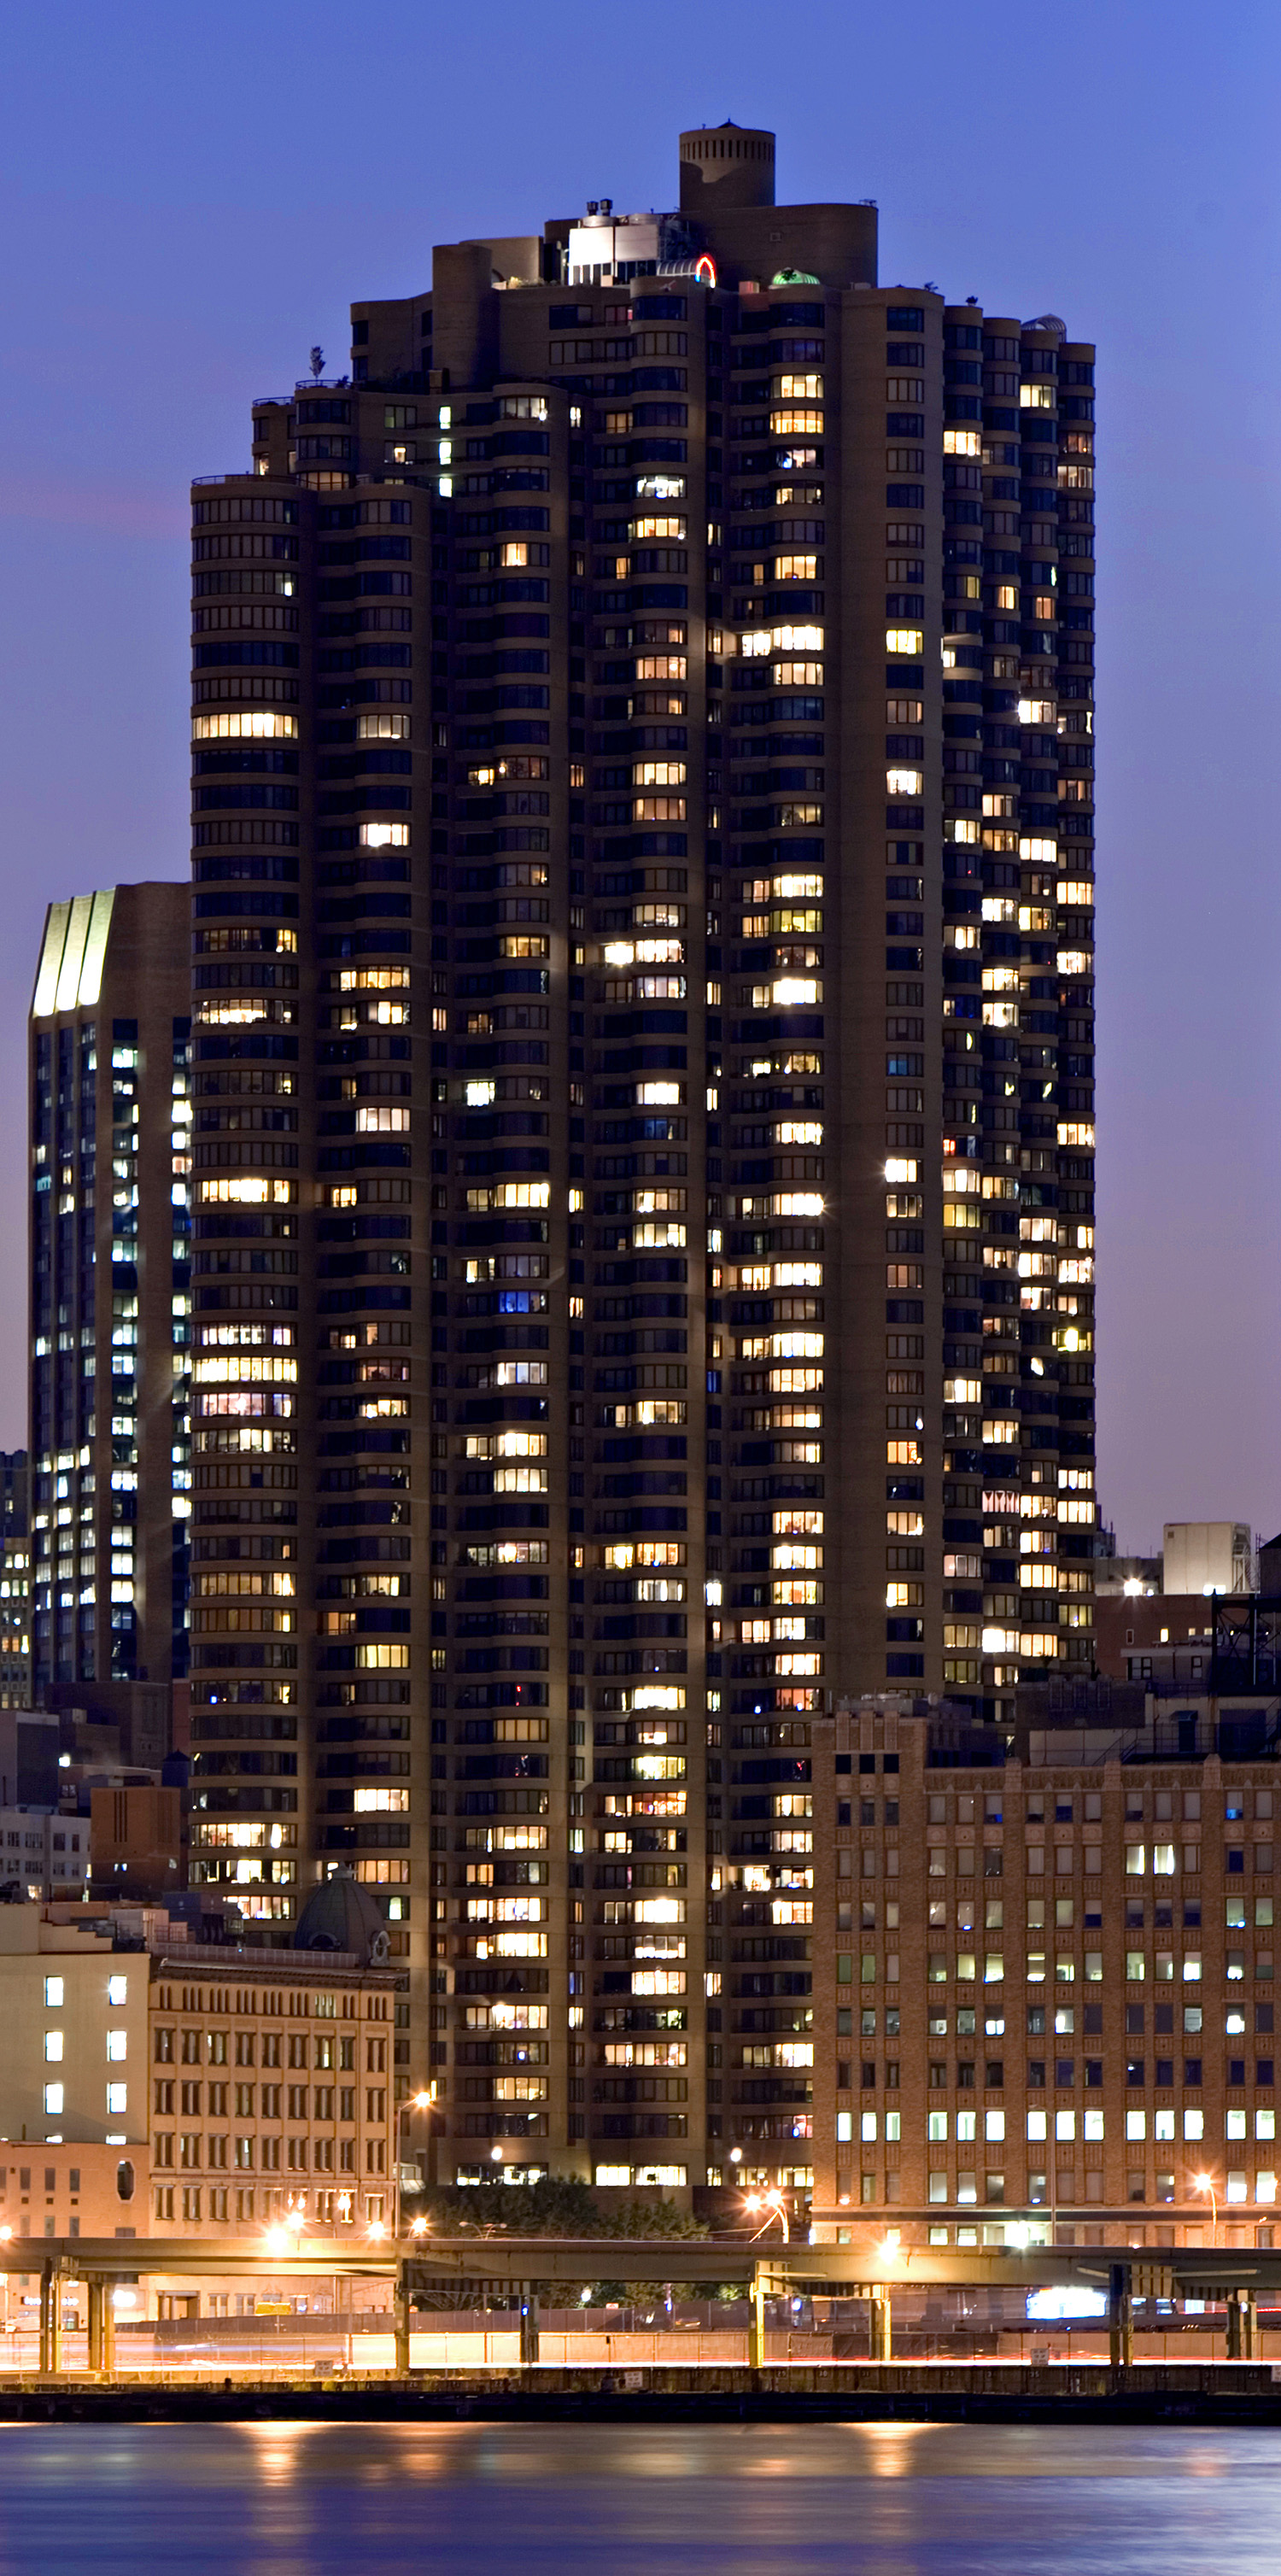 The Corinthian, New York City - Night view from Queens. © Mathias Beinling